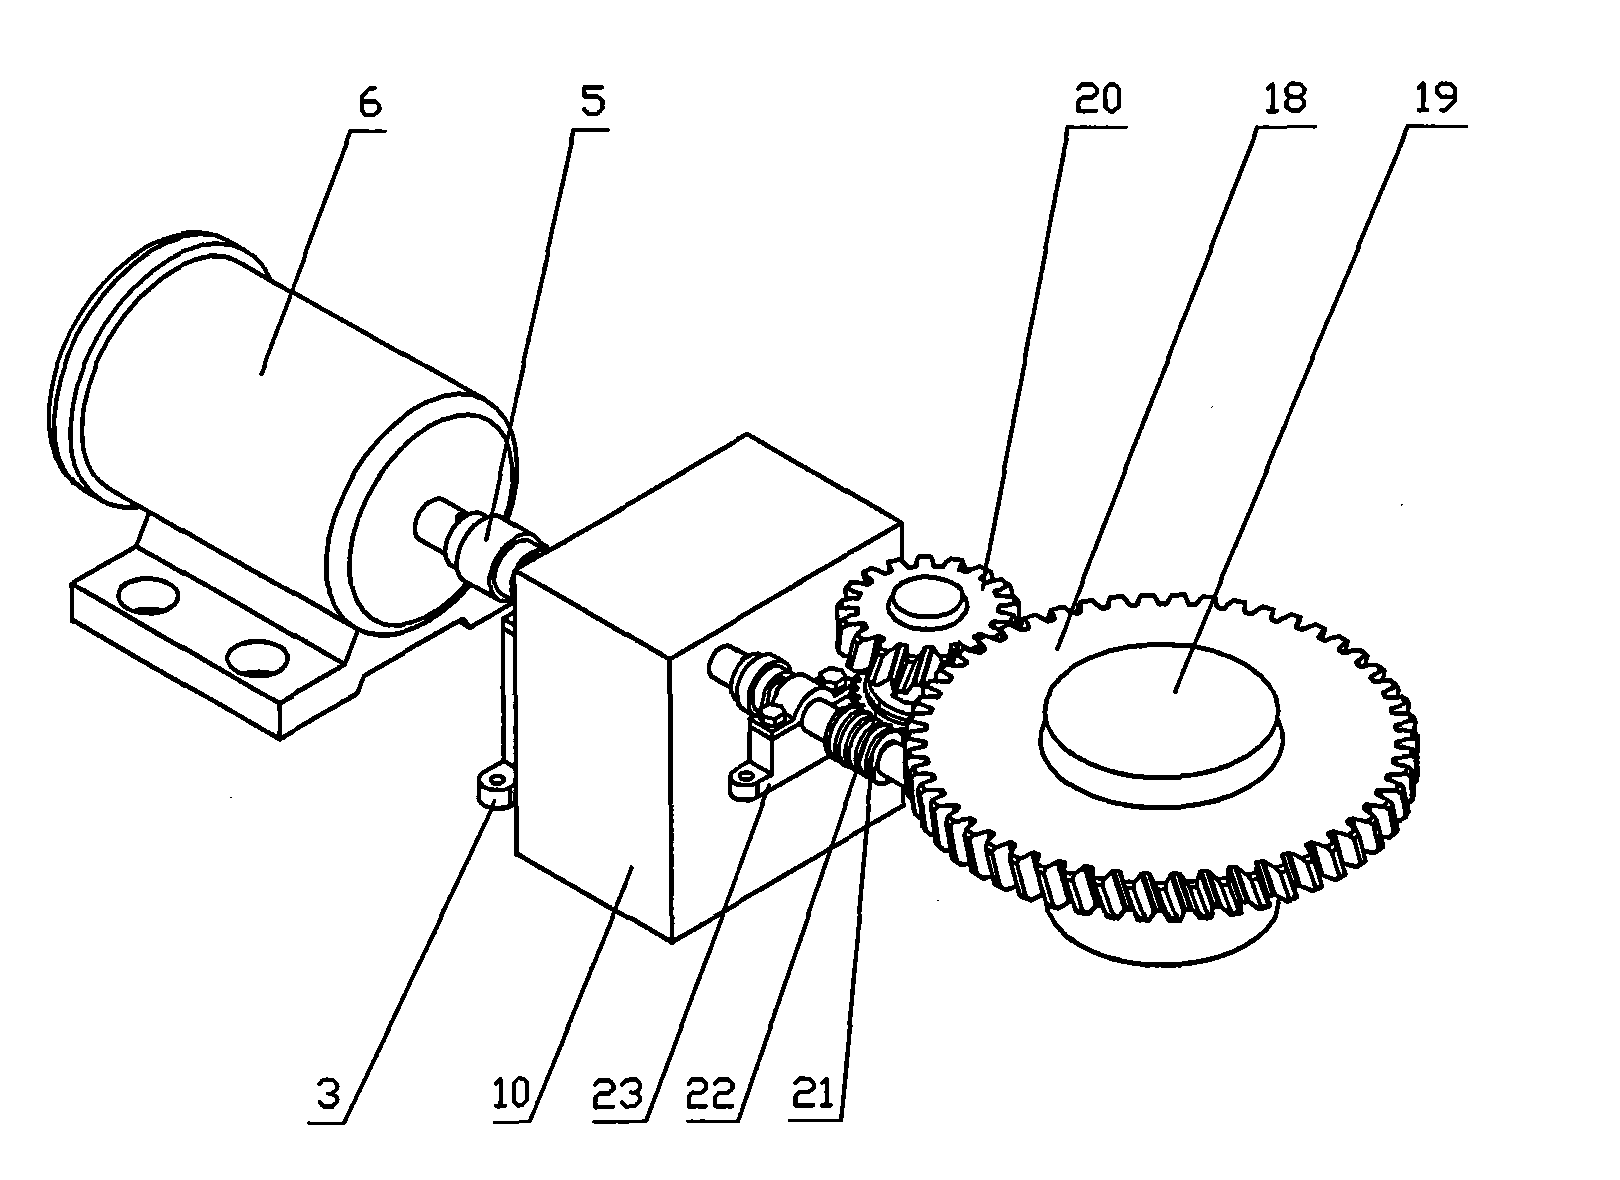 Bidirectional composite deflection tilting gravity casting method and device thereof